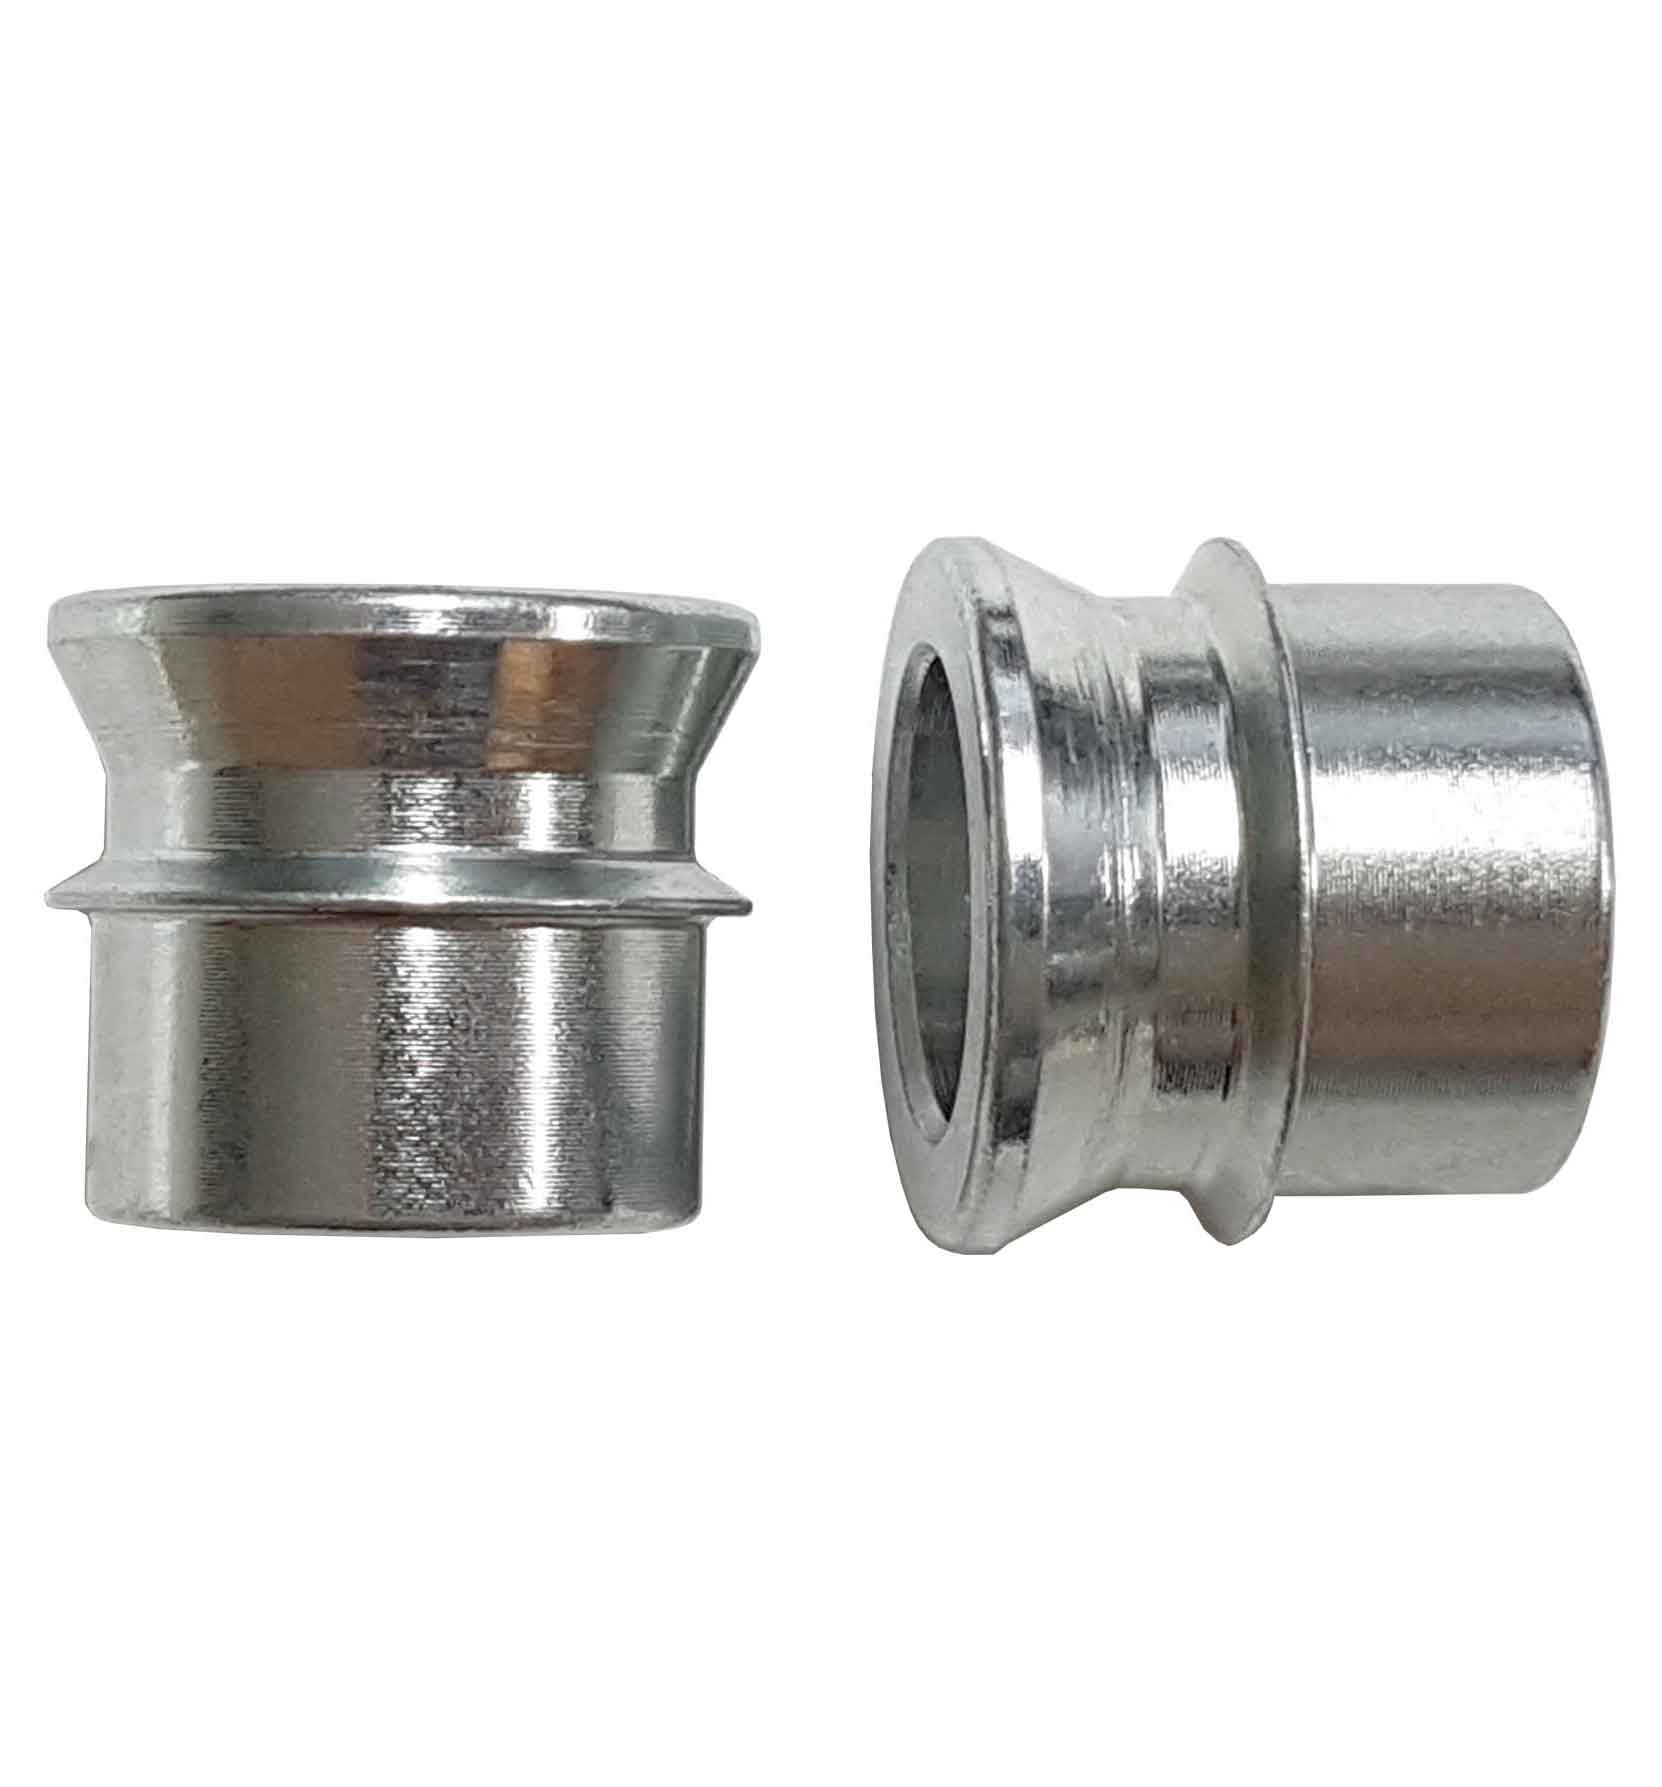 7/8" to 9/16" Rod End Misalignment Reducers